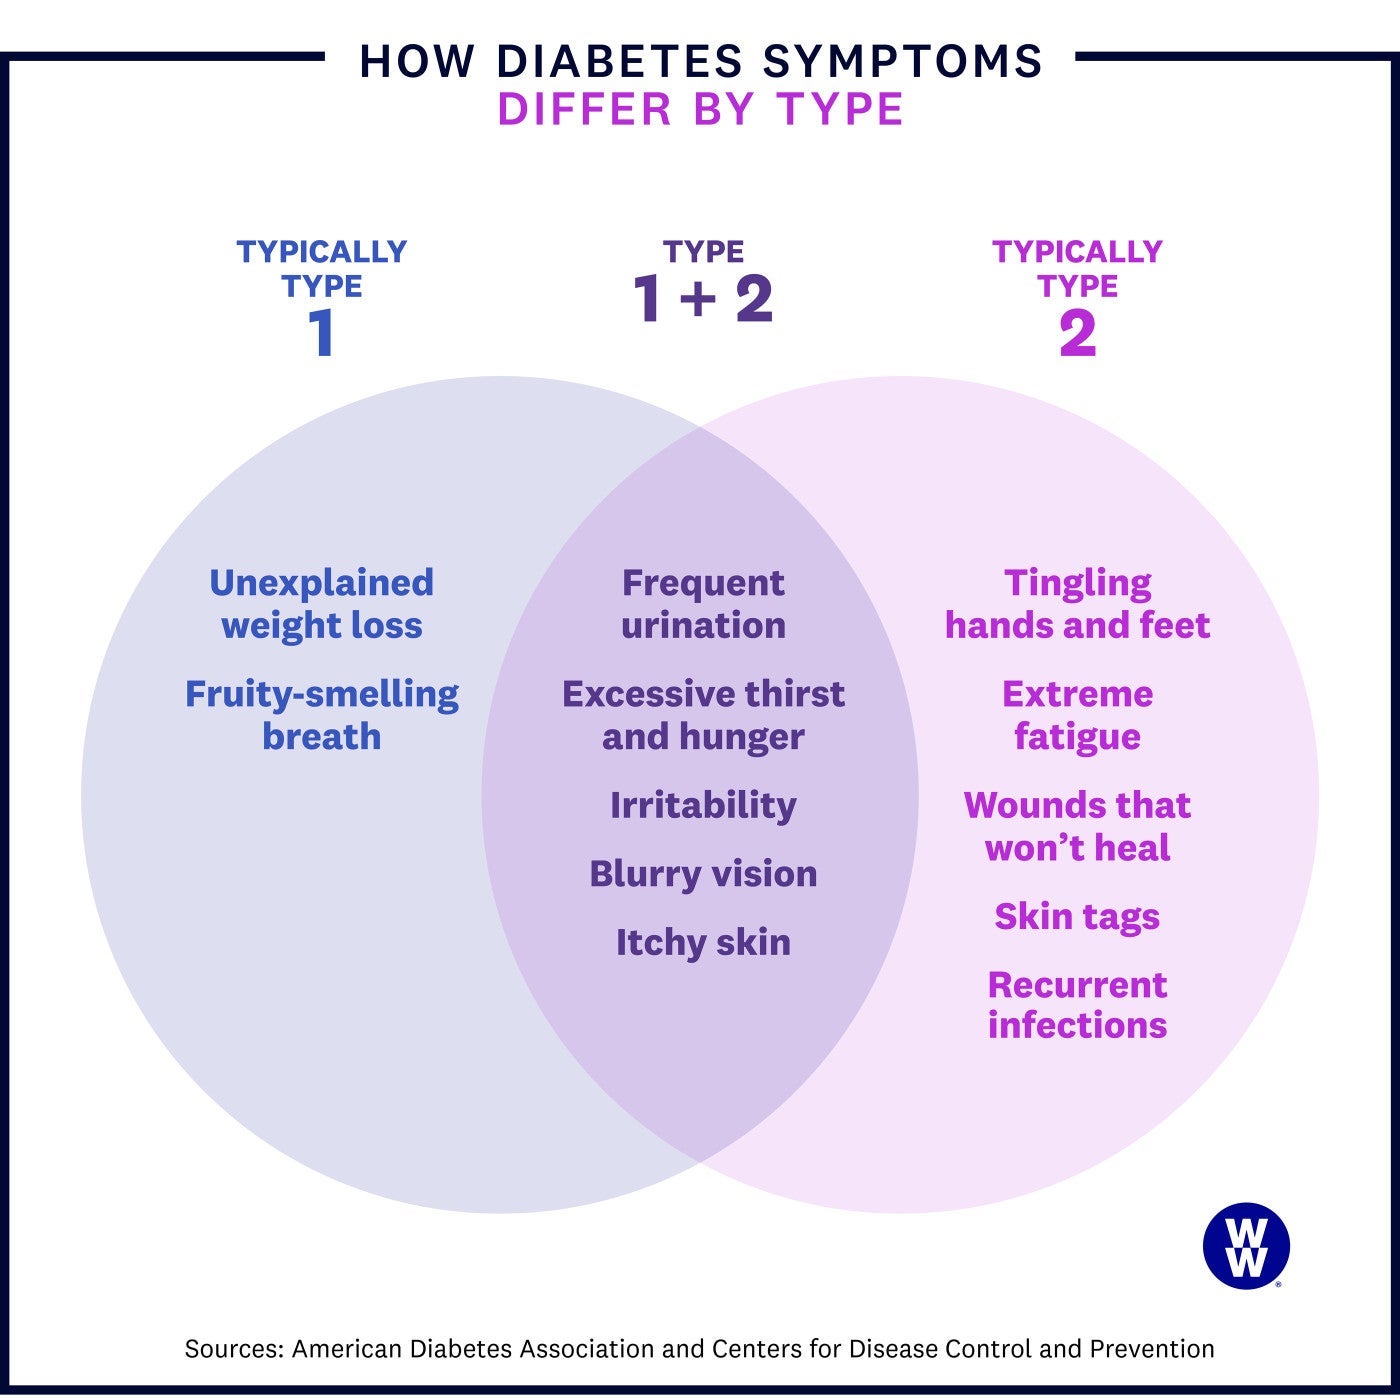 How diabetes symptoms differ by type